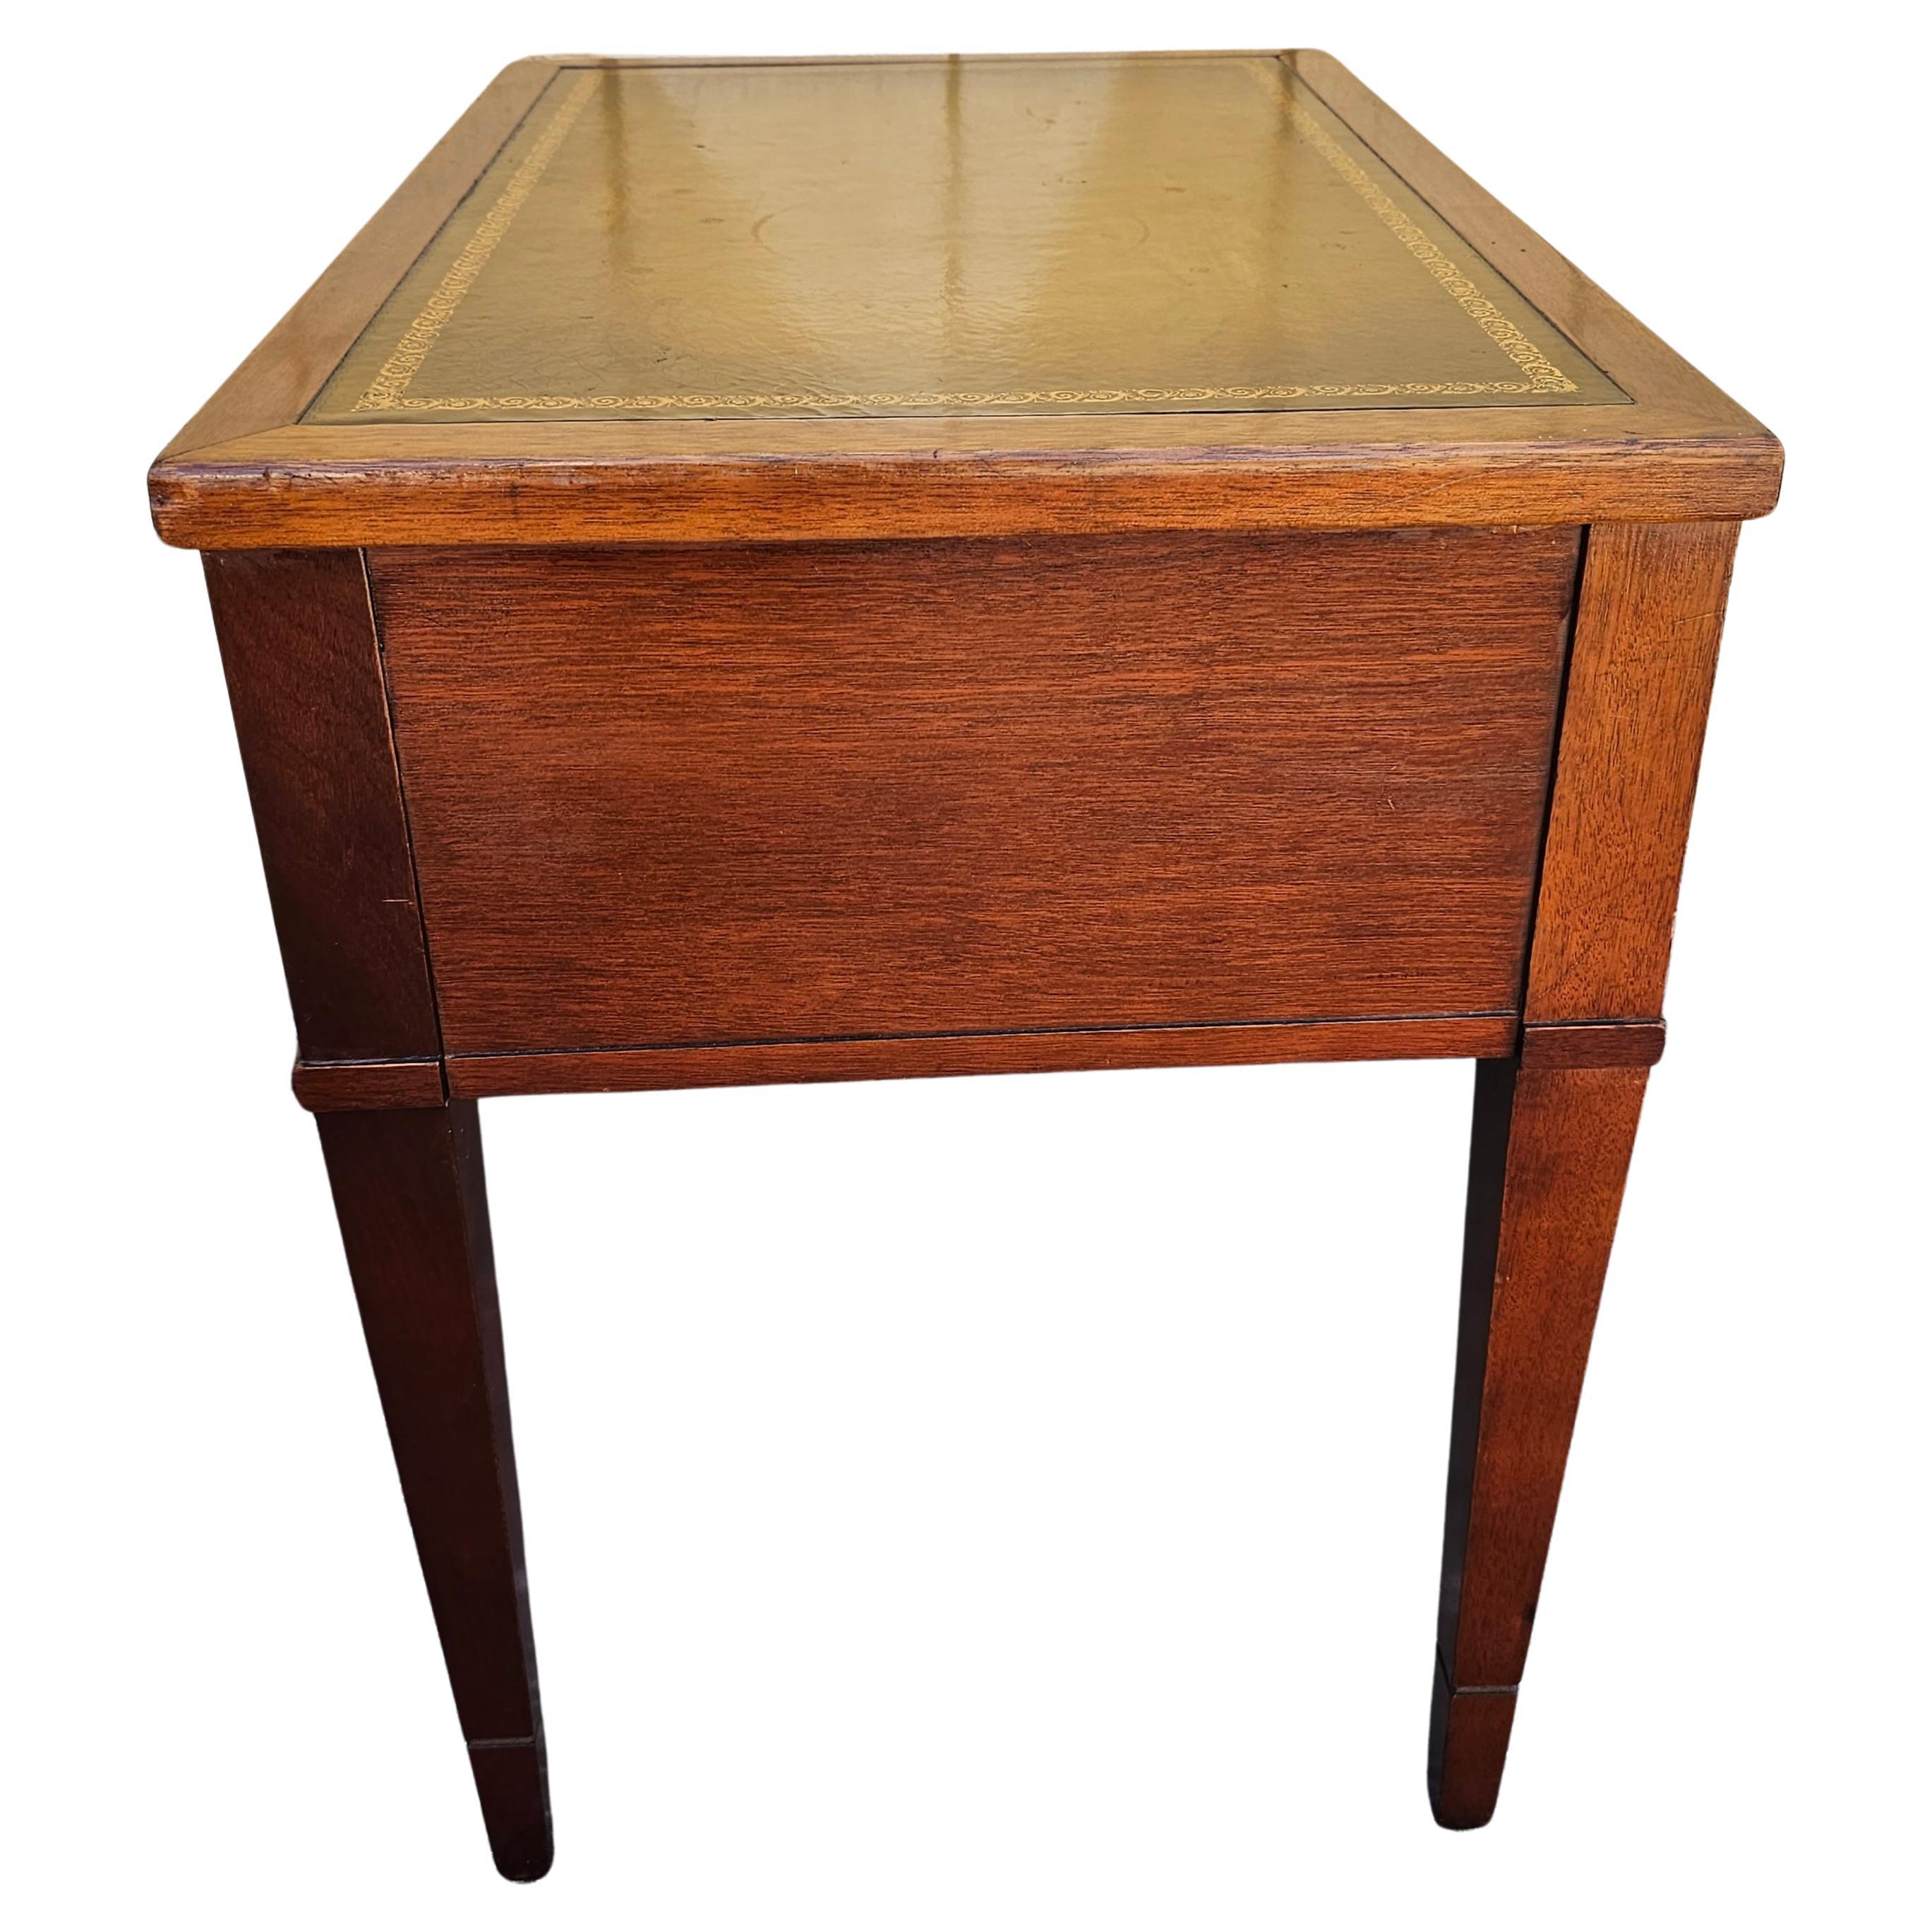 American Mid-Century Mersman Mahogany and Stenciled Leather Top Side Tables, Pair For Sale